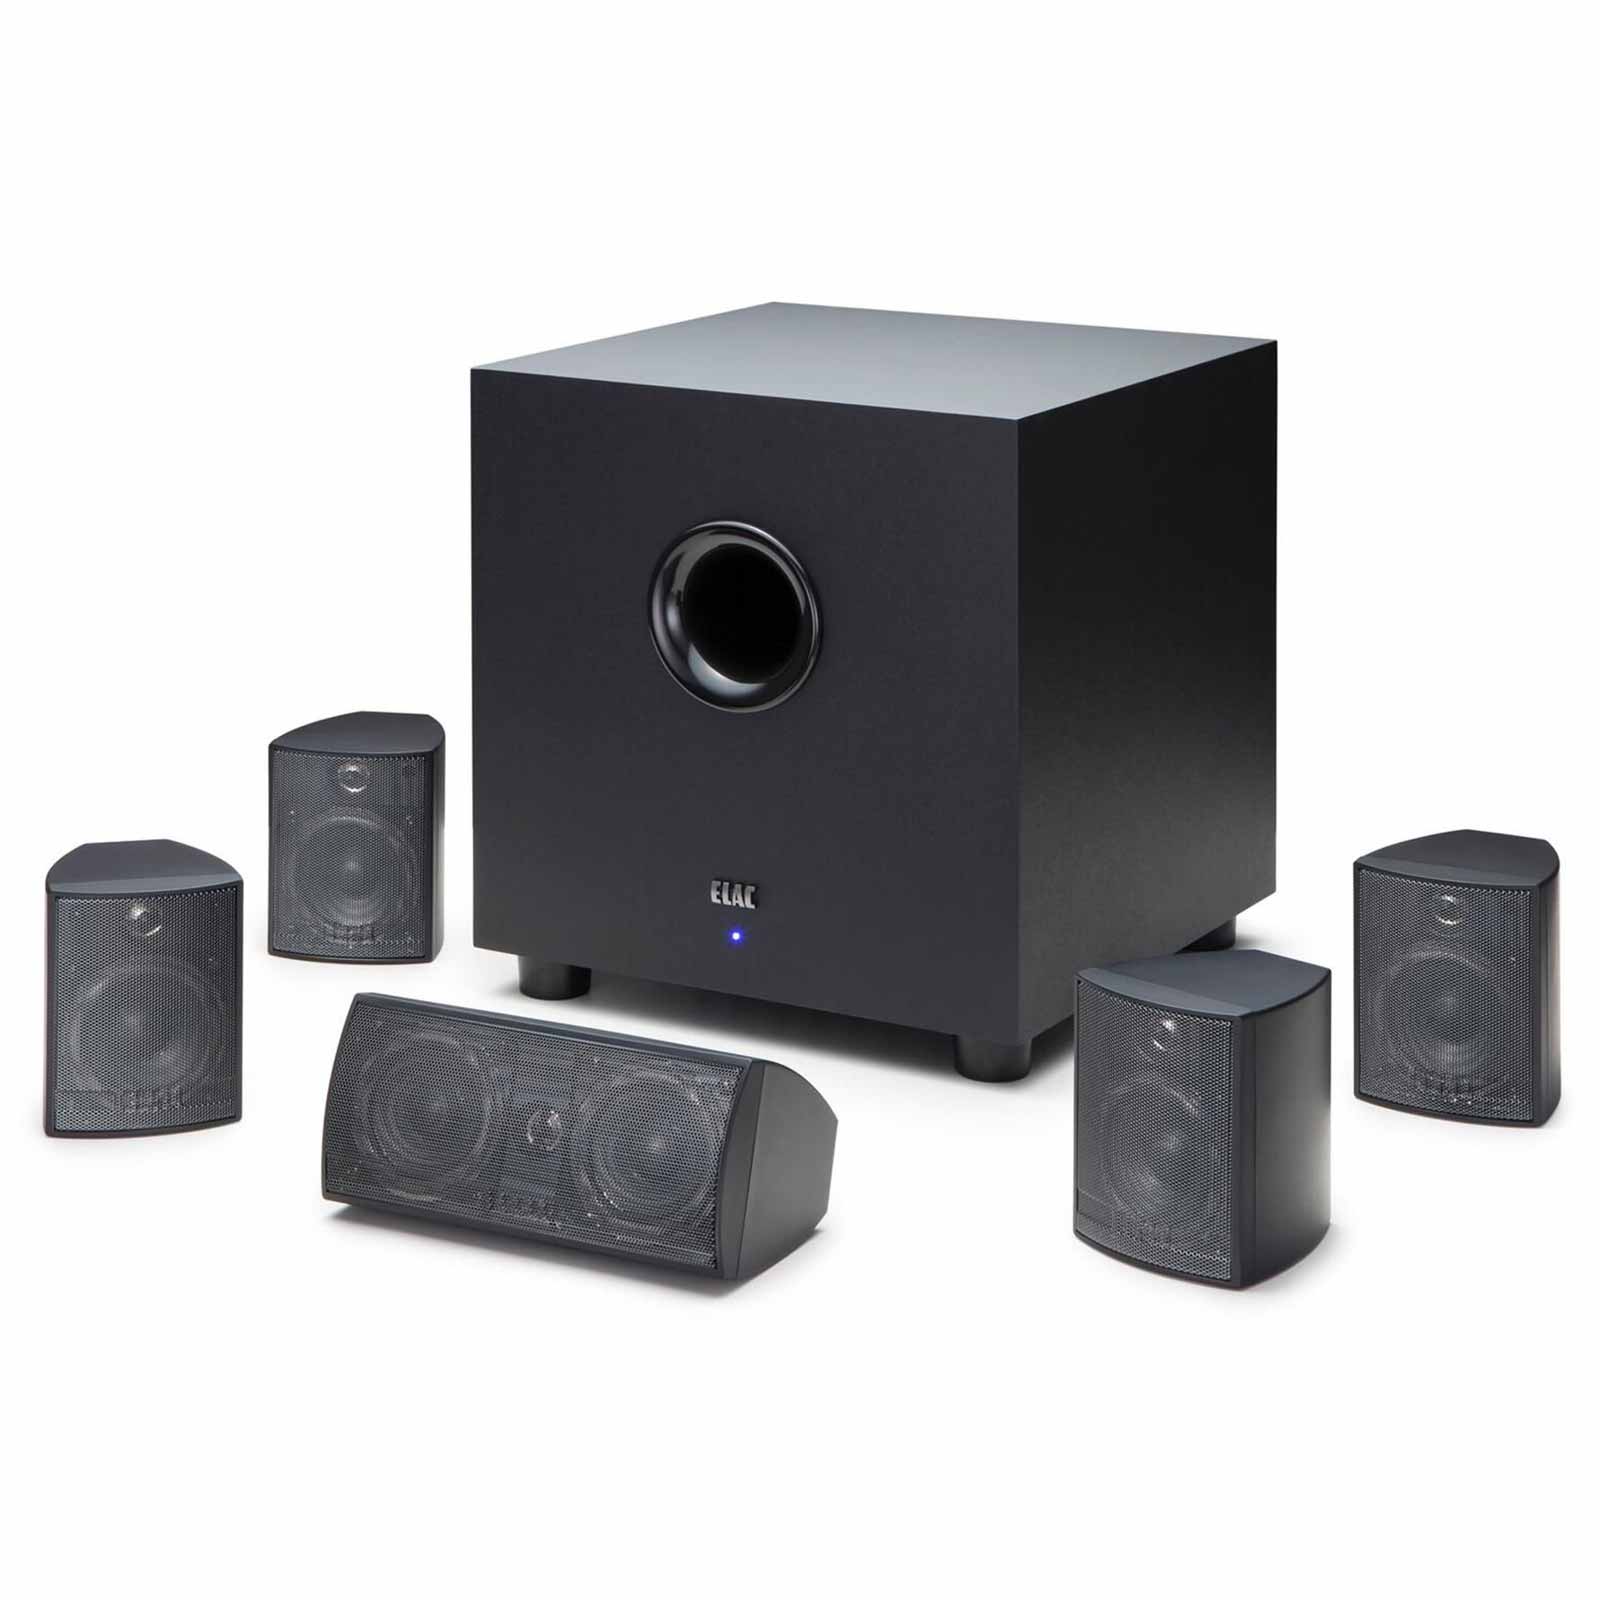 Elac Cinema 5 SET 5.1 Channel Home Theater Speakers